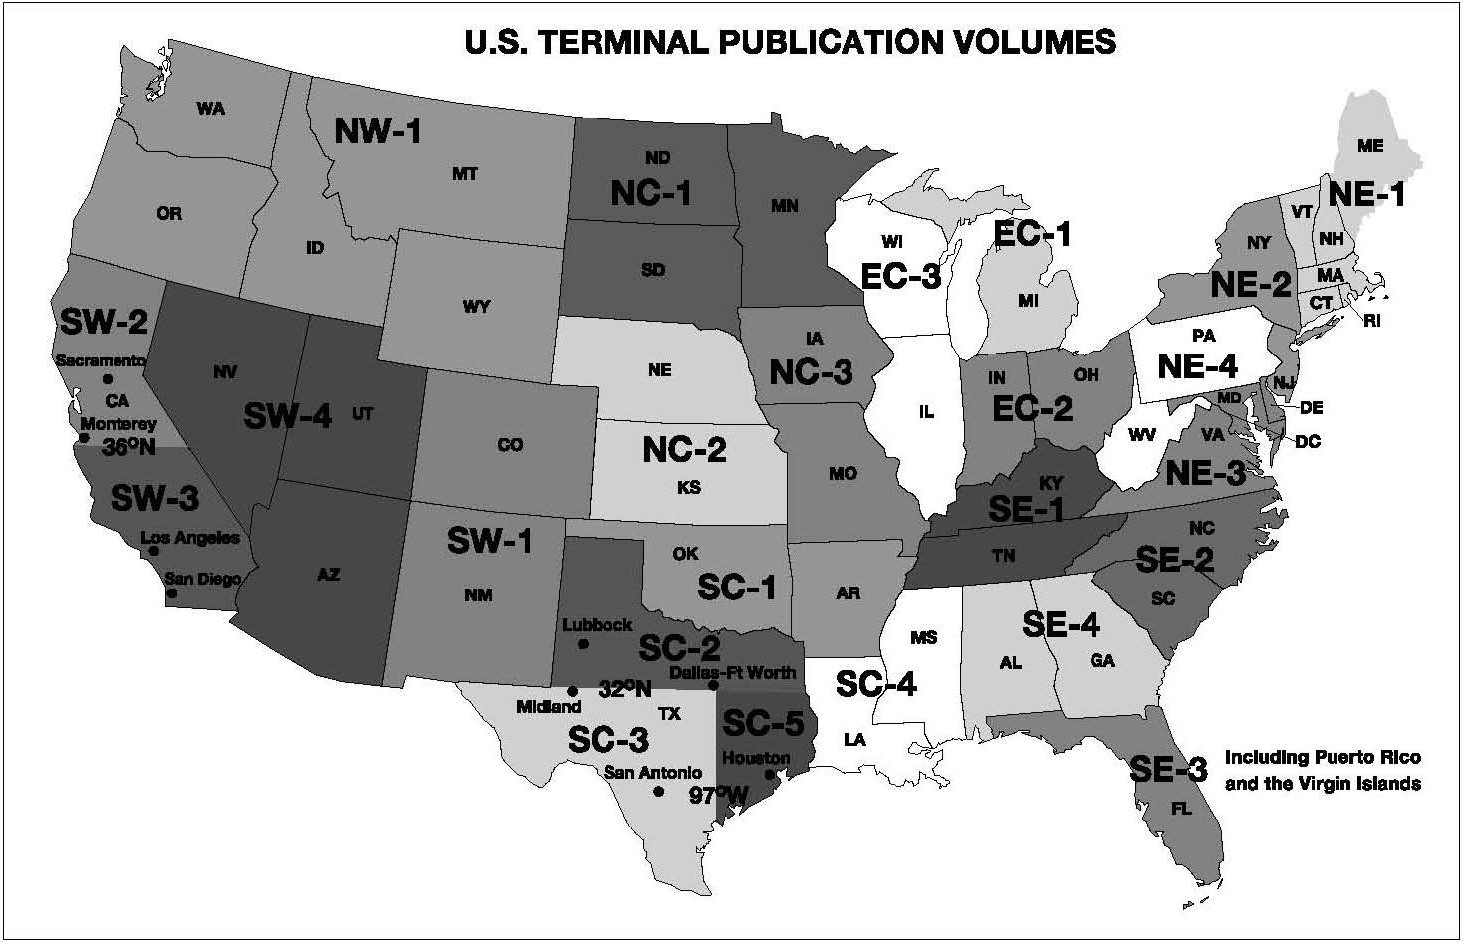 A graphic depicting the U.S. terminal publication volumes.